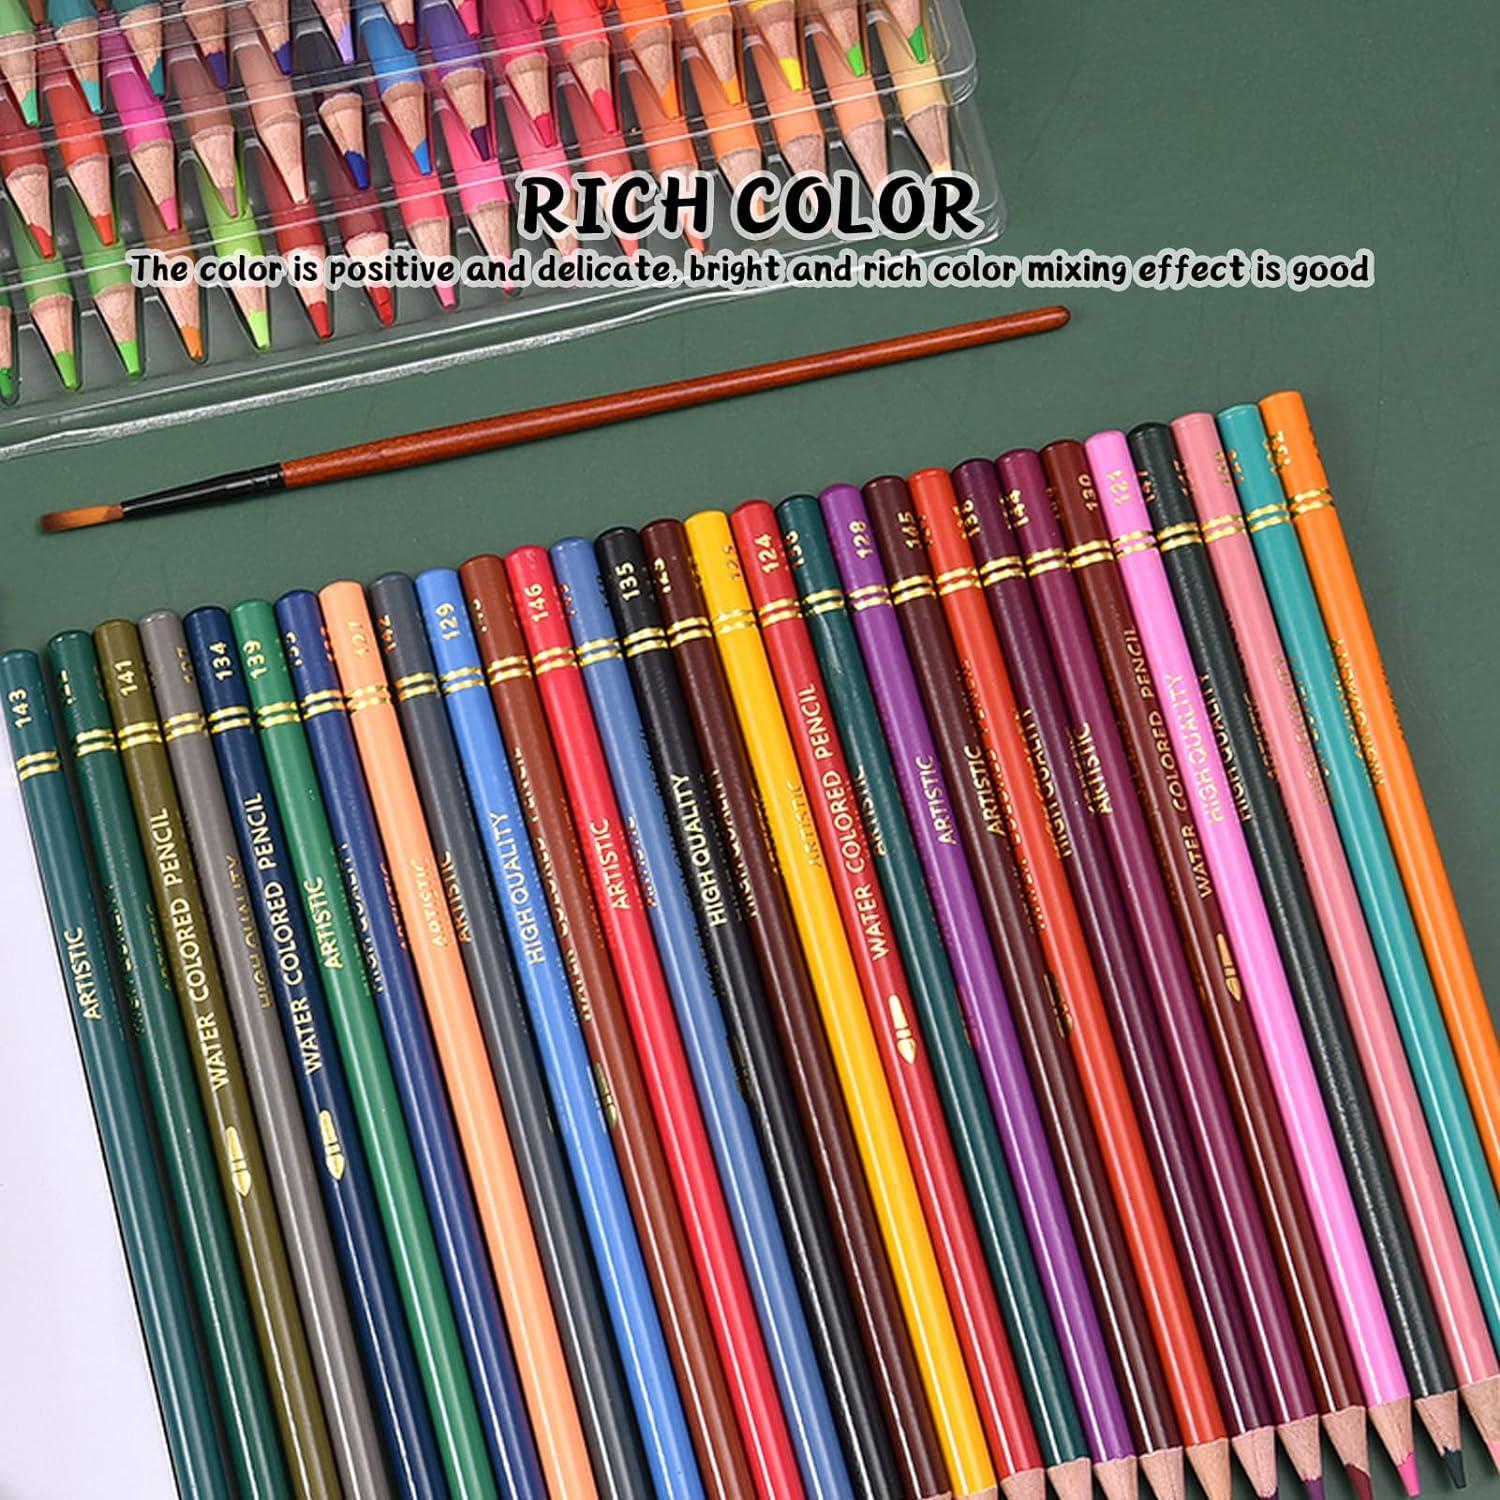  Qionew Sketch Pencils for Drawing,12 Pack Drawing